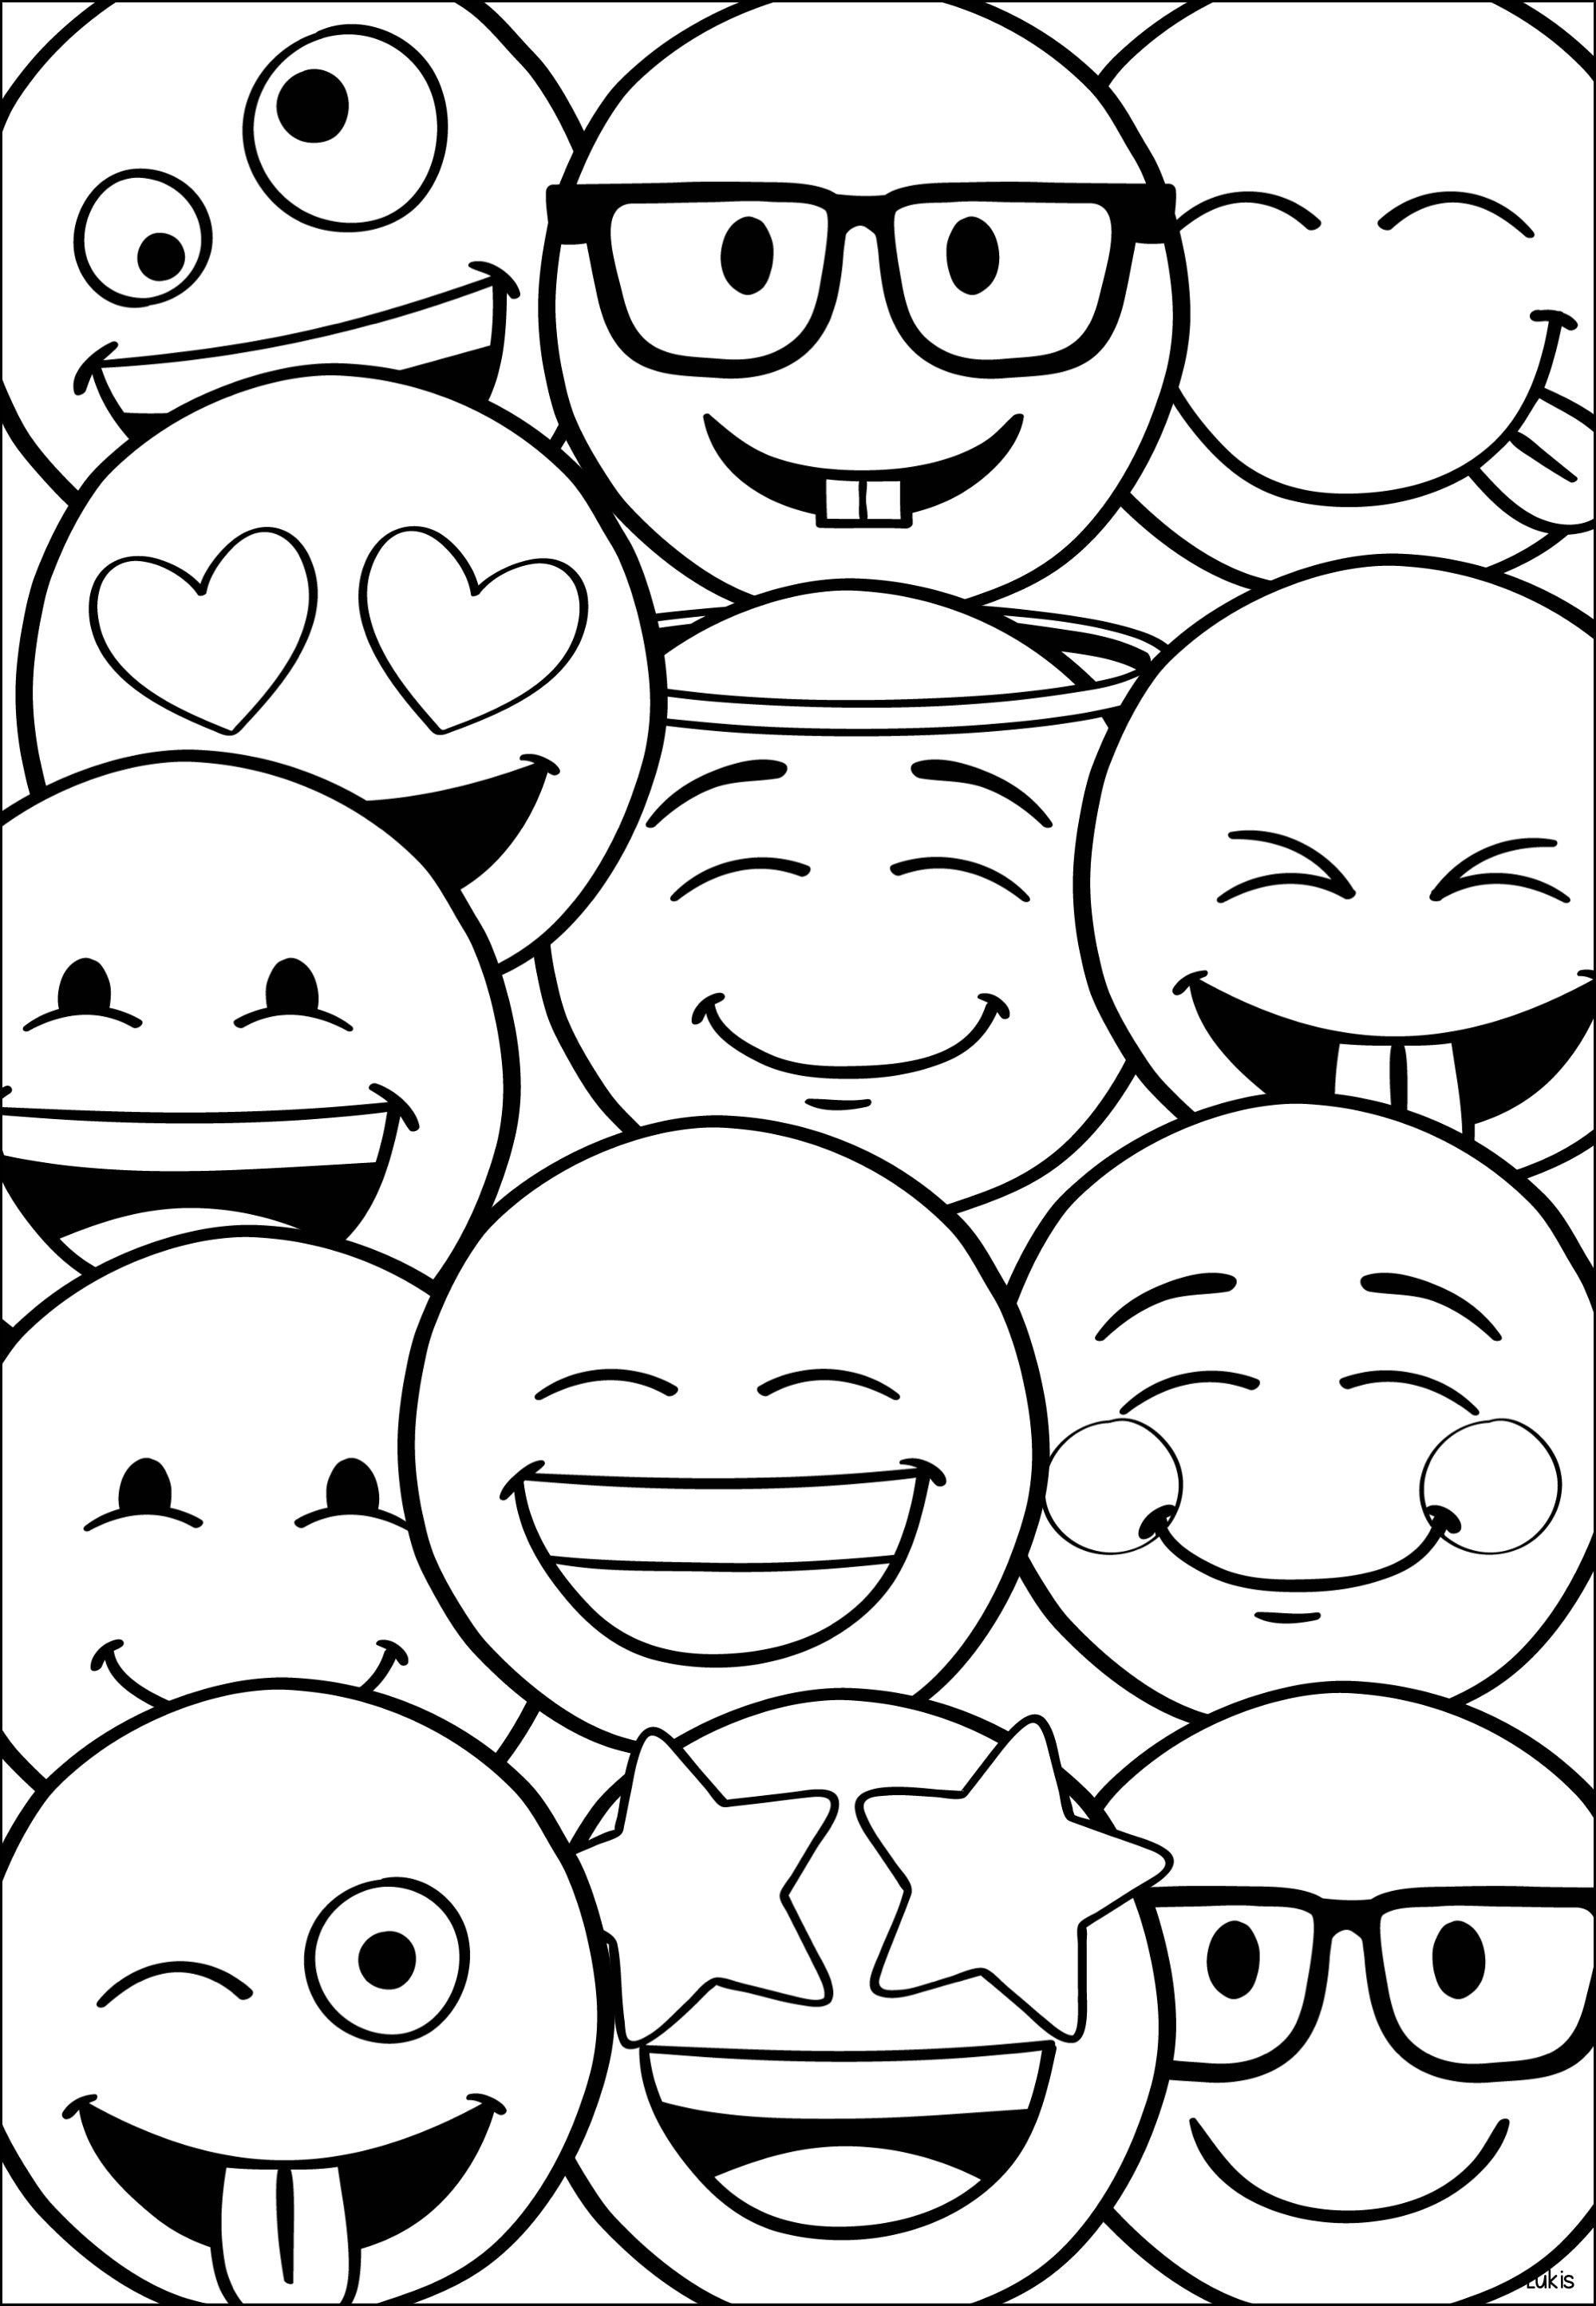 World smile day printable coloring pages instant download pack kids activity classroom fun digital coloring book pdf format